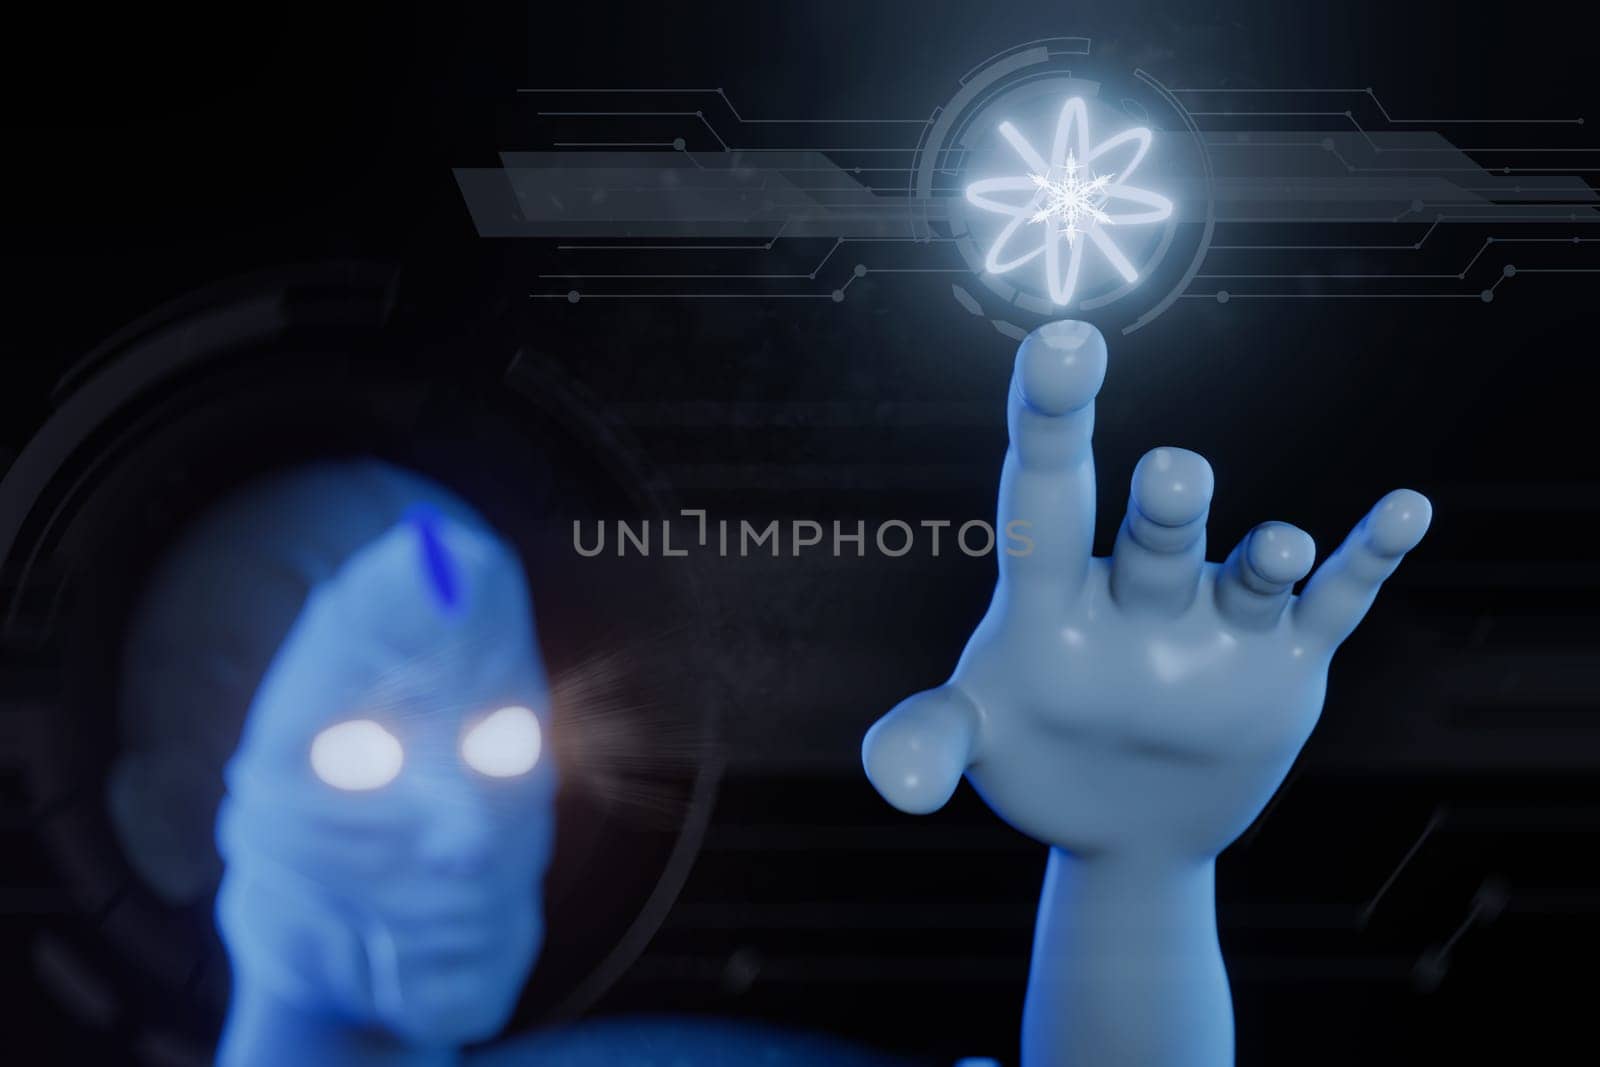 View of a Cyborg robot hand on a city glowing background 3d rendering for Artificial intelligence background concept.